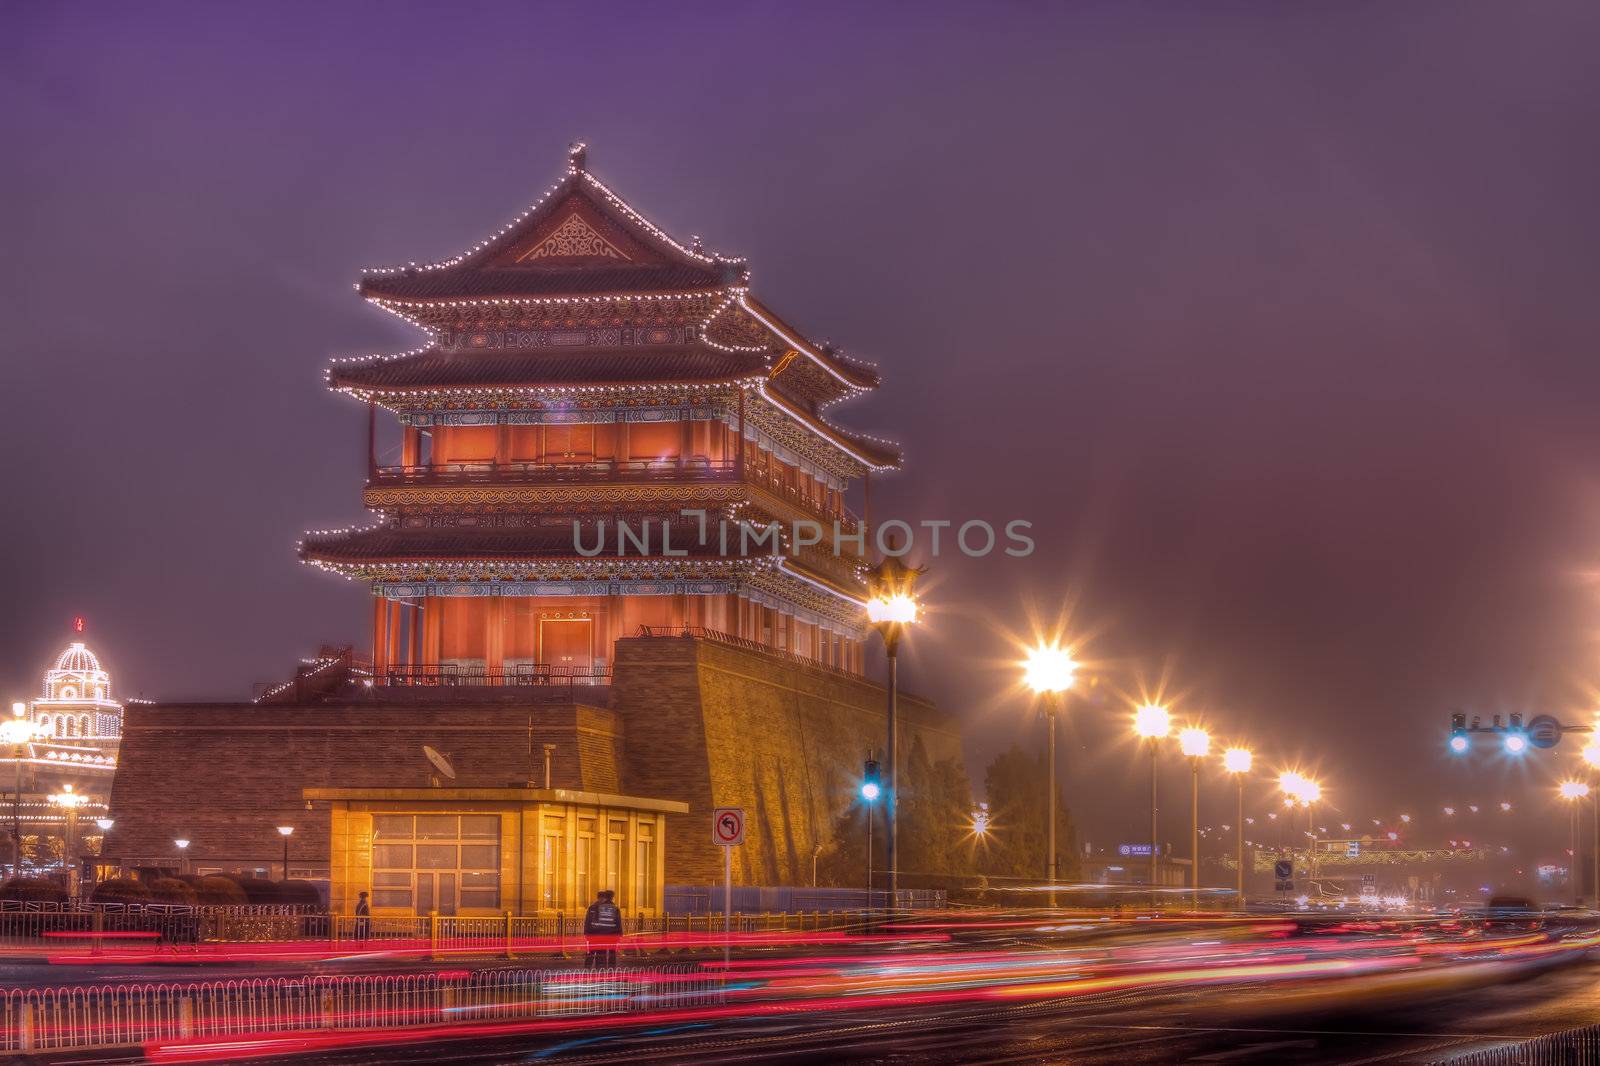 The night scene of the forbidden city of China with light